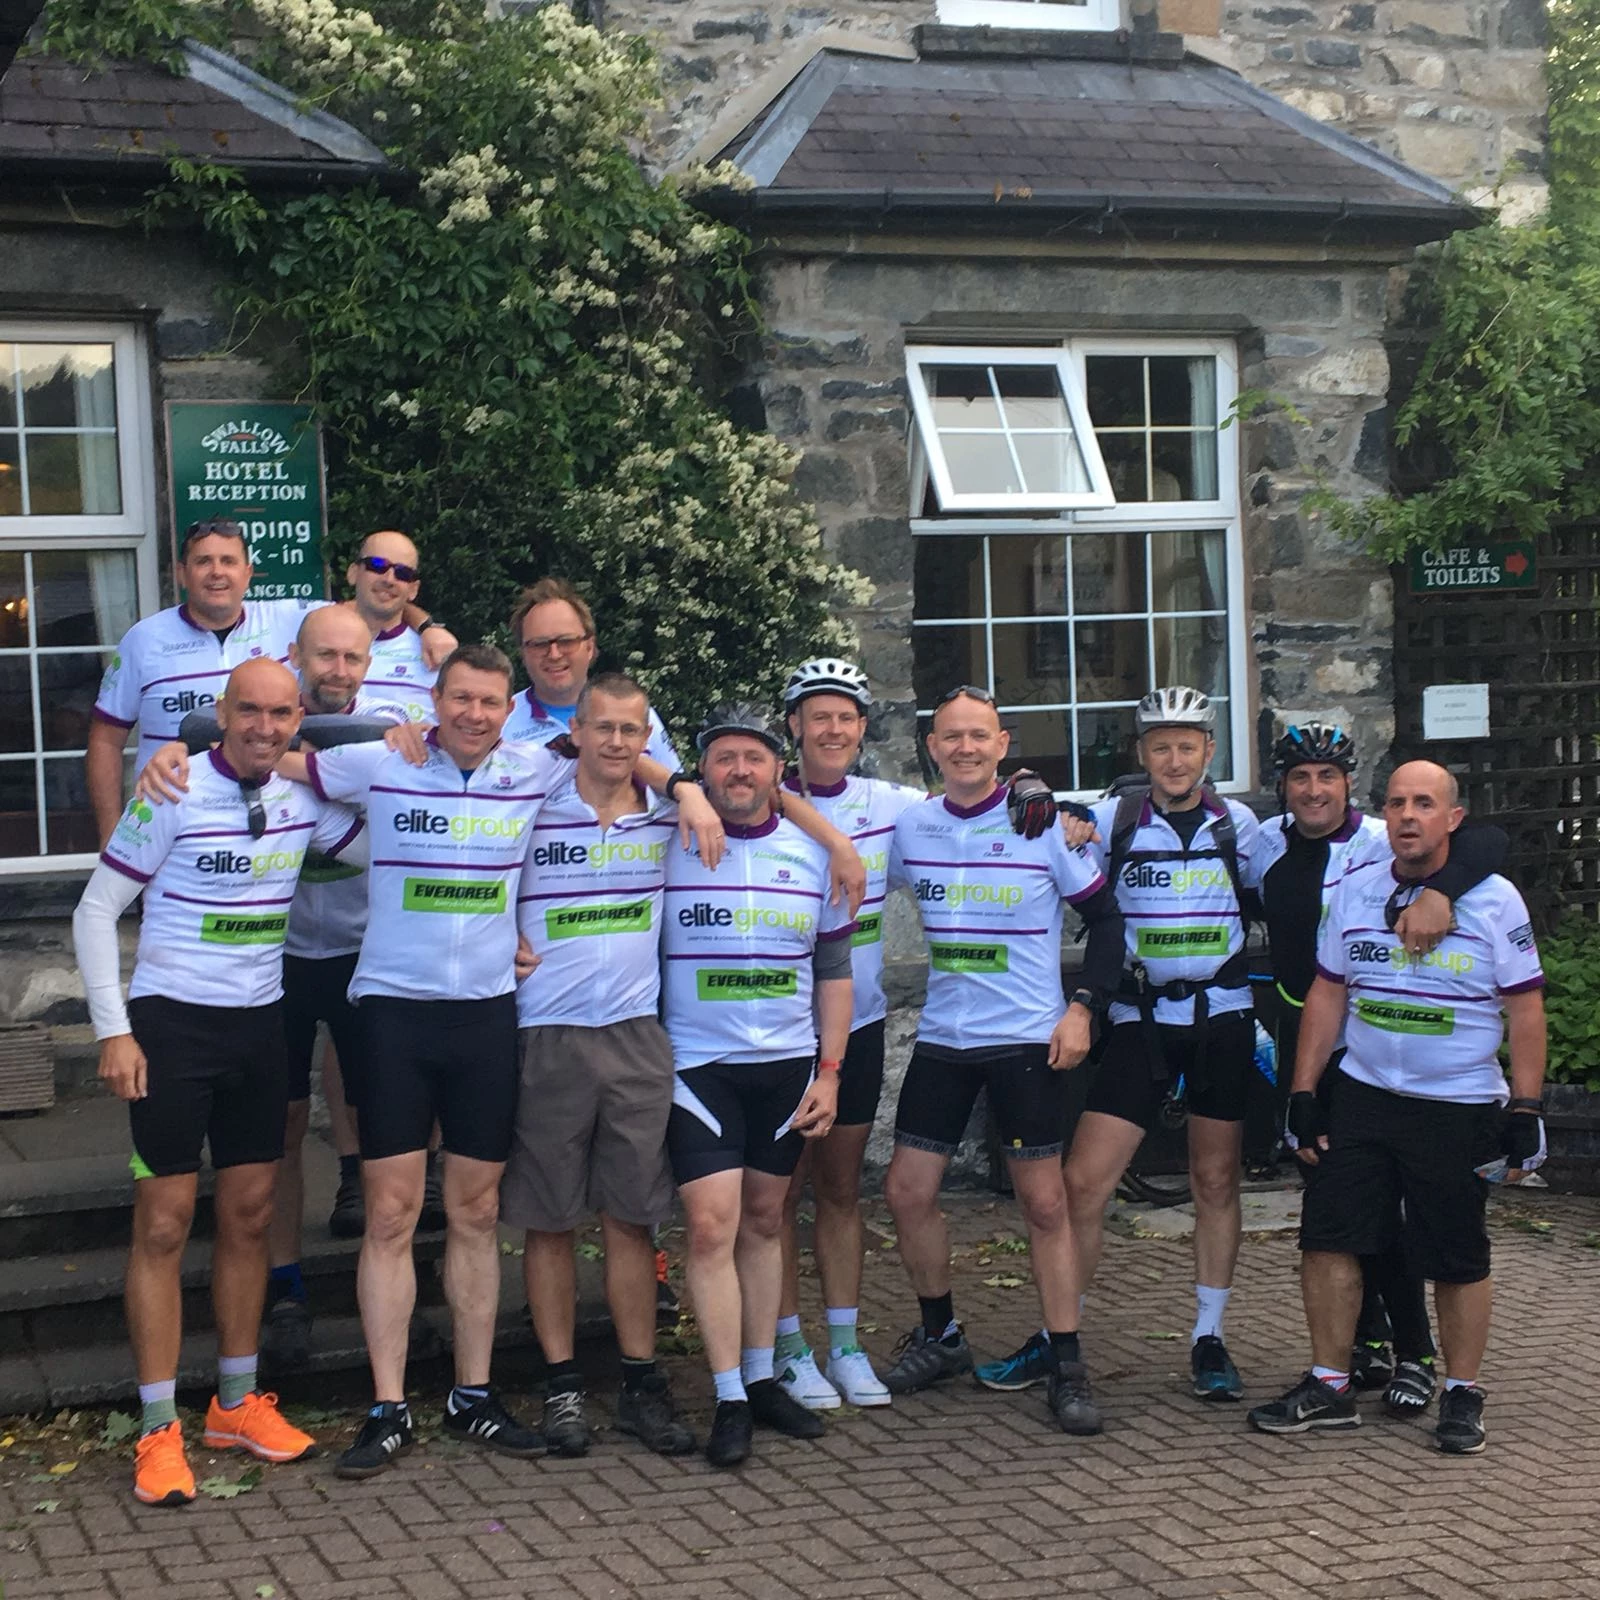 Ainsdale CC completed a gruelling 200-mile round trip form Liverpool to North Wales and back.